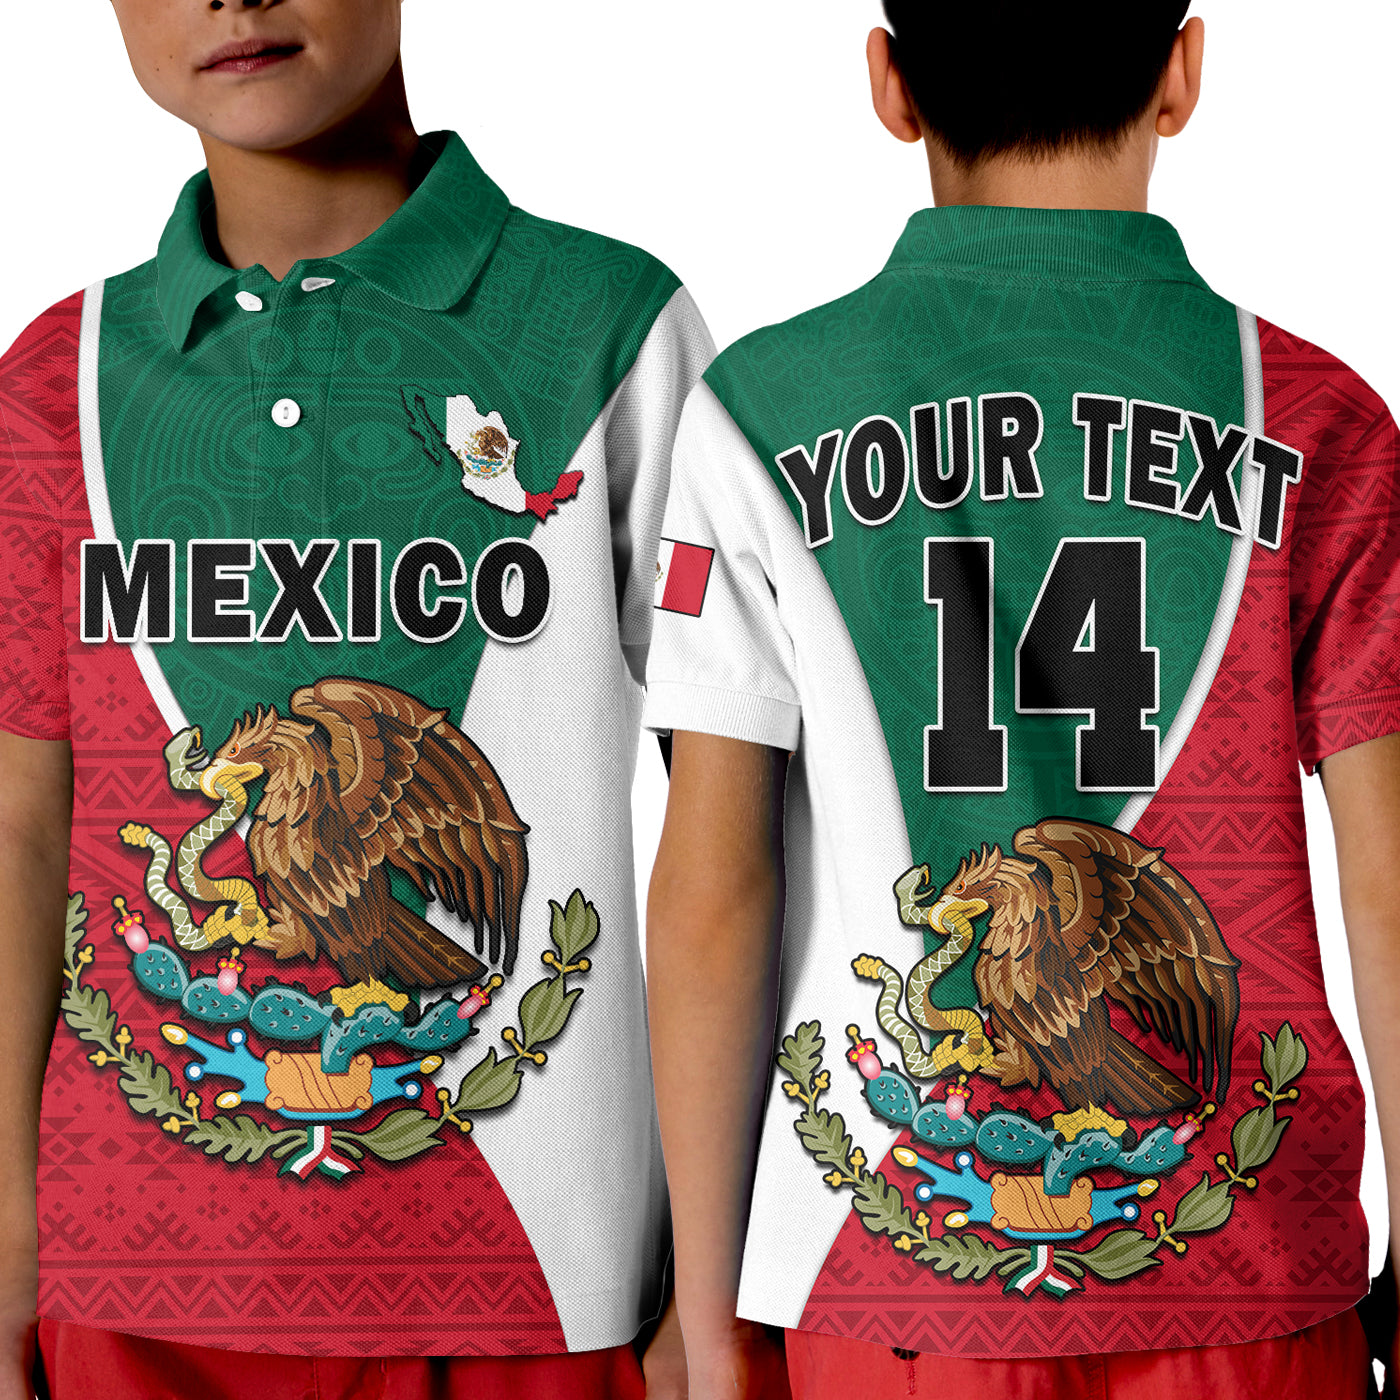 custom-text-and-number-mexico-polo-shirt-kid-mexican-aztec-pattern